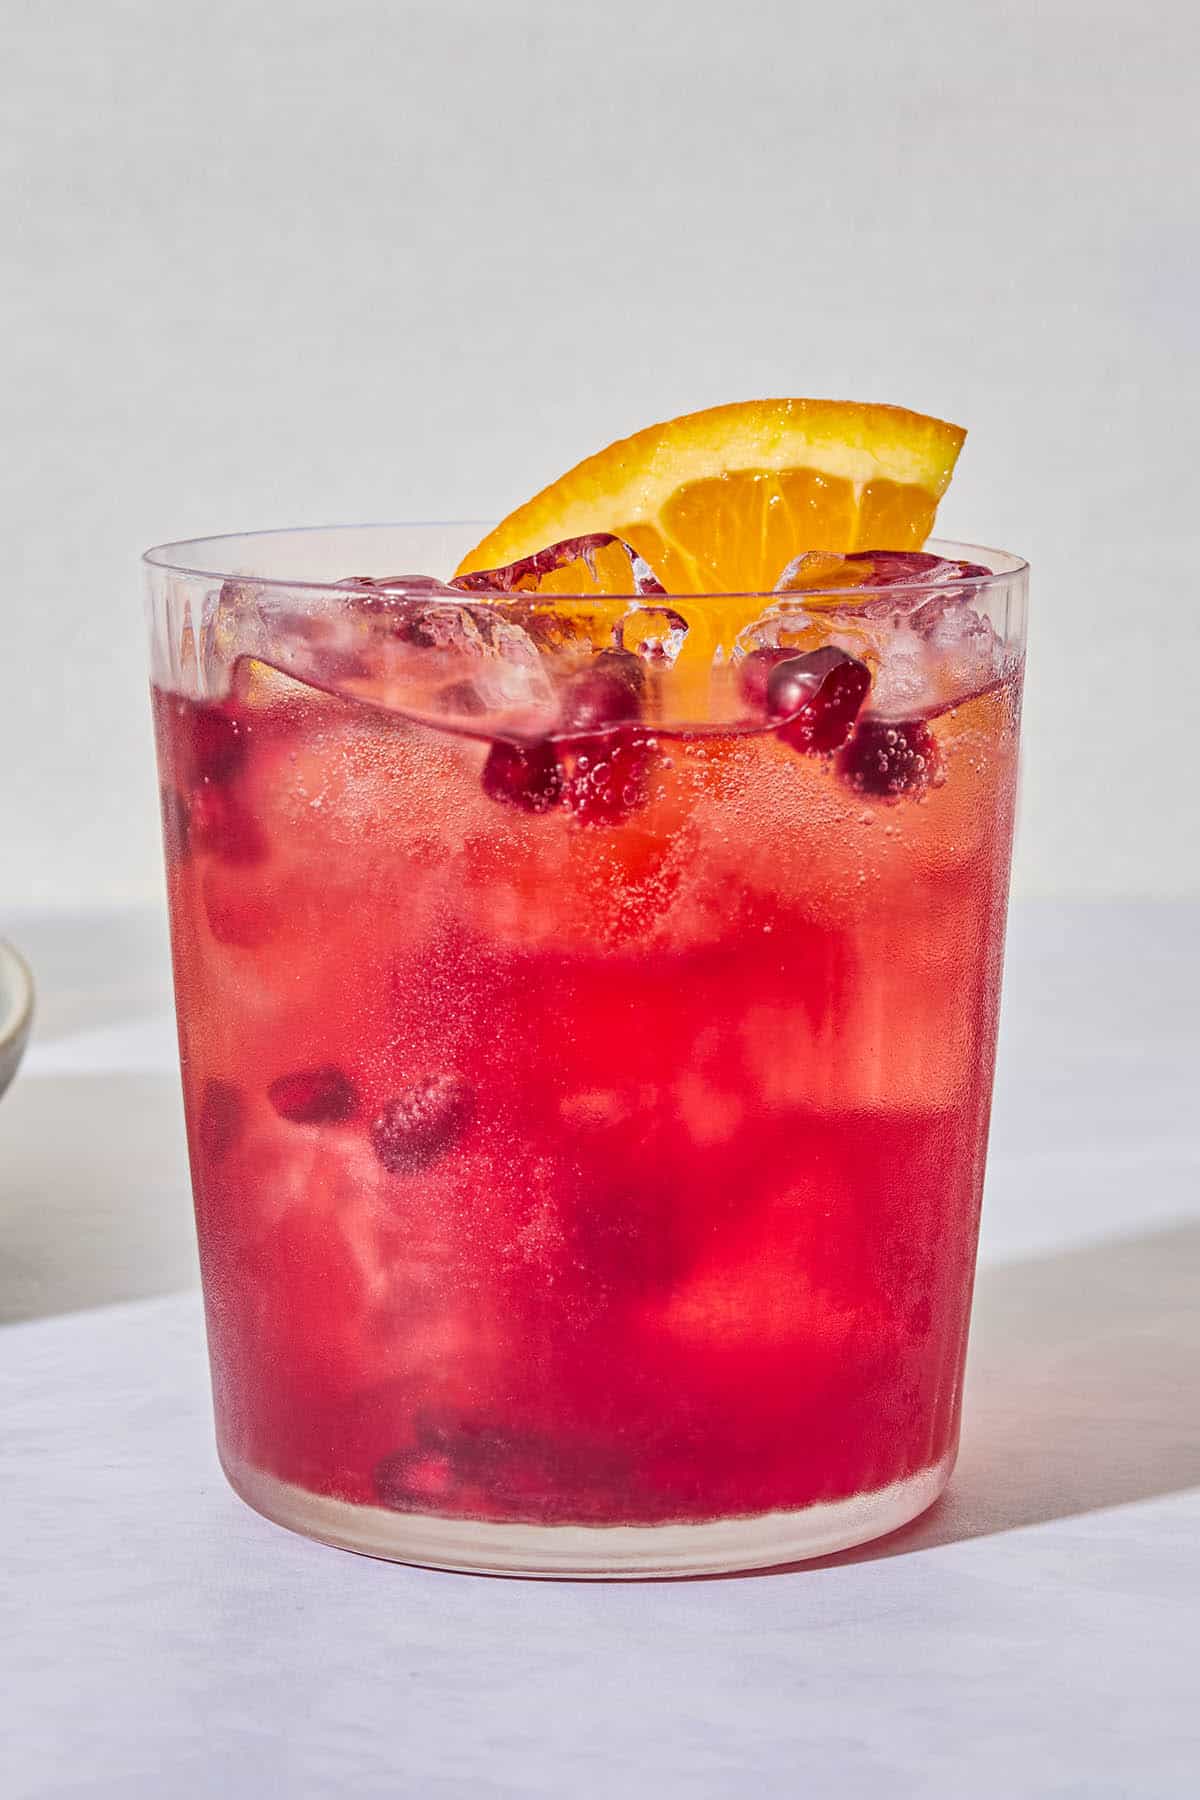 A close up of a pomegranate fizz mocktail garnished with pomegranate seeds and an orange wedge.